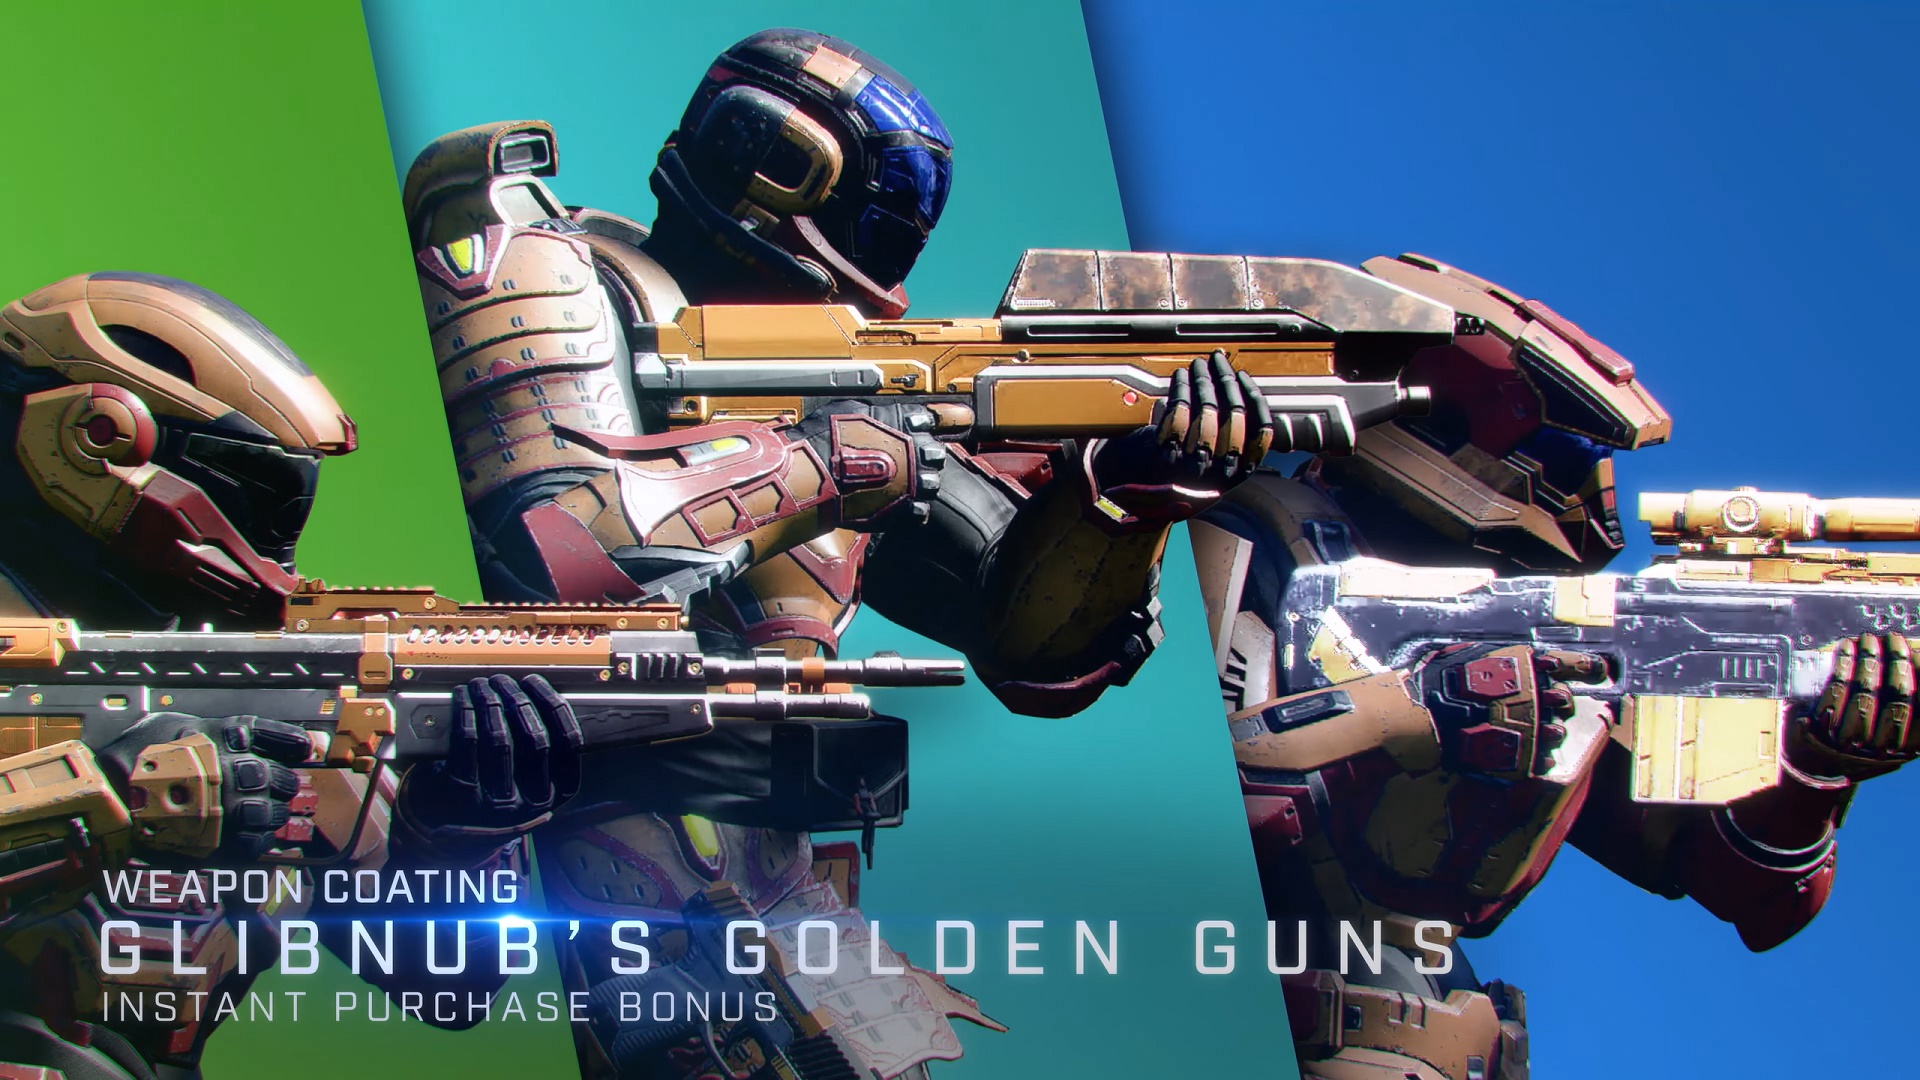 Halo Infinite image of three Spartans holding weapons with the weapon coating Glibnub's Golden Guns